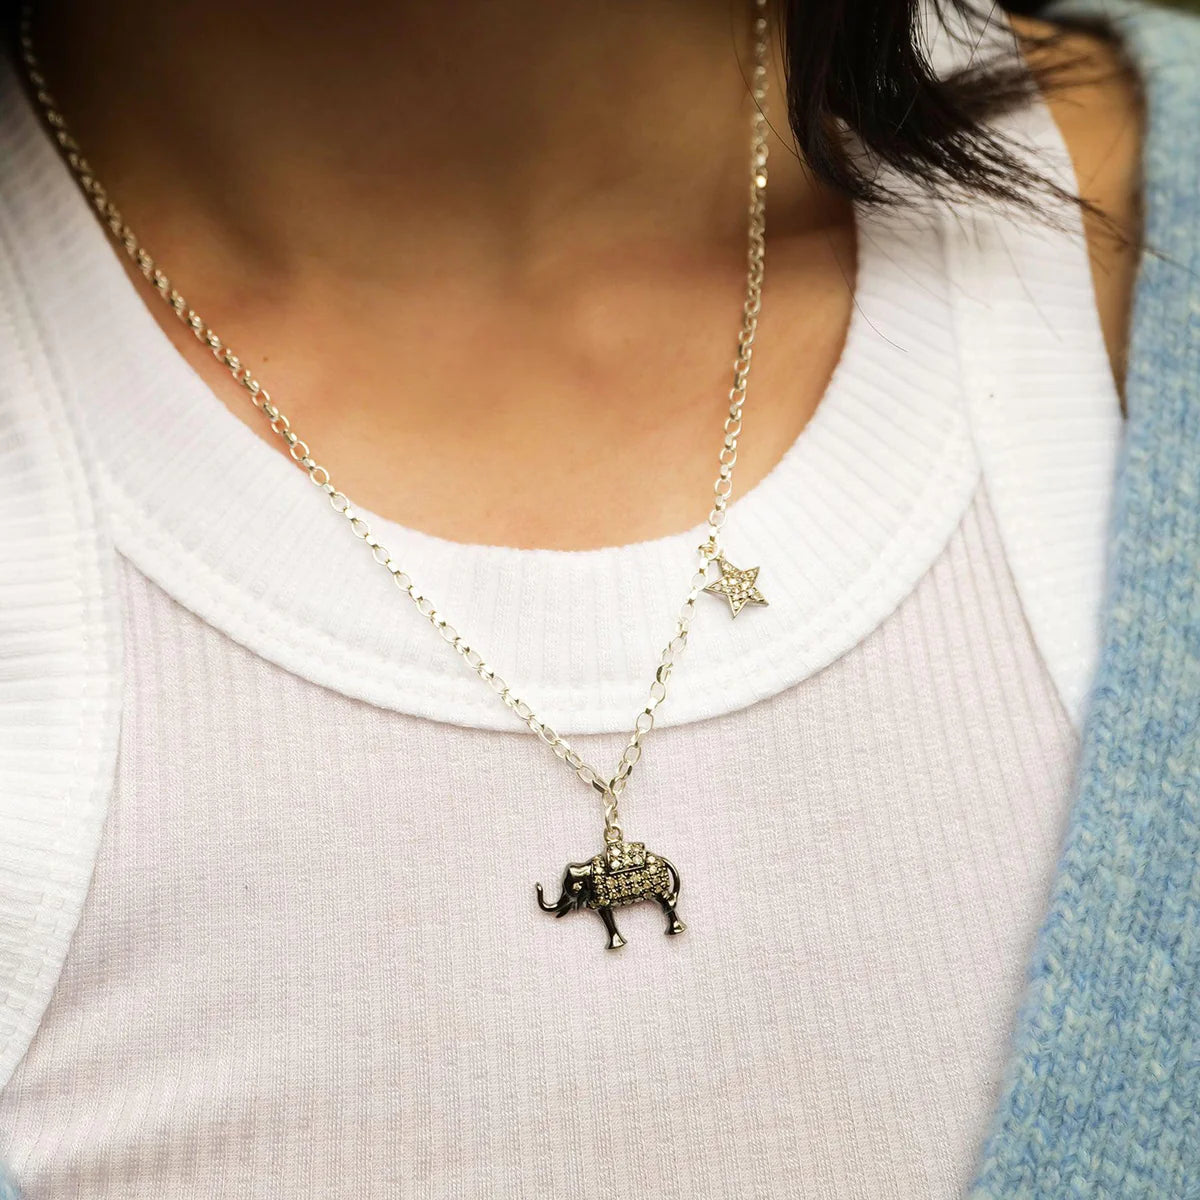 Diamond-Silver-Elephant-Double-Sided-Star-Necklace-2_1200x.webp__PID:64f90364-abe5-4cfd-8cd1-642630ef0b9e